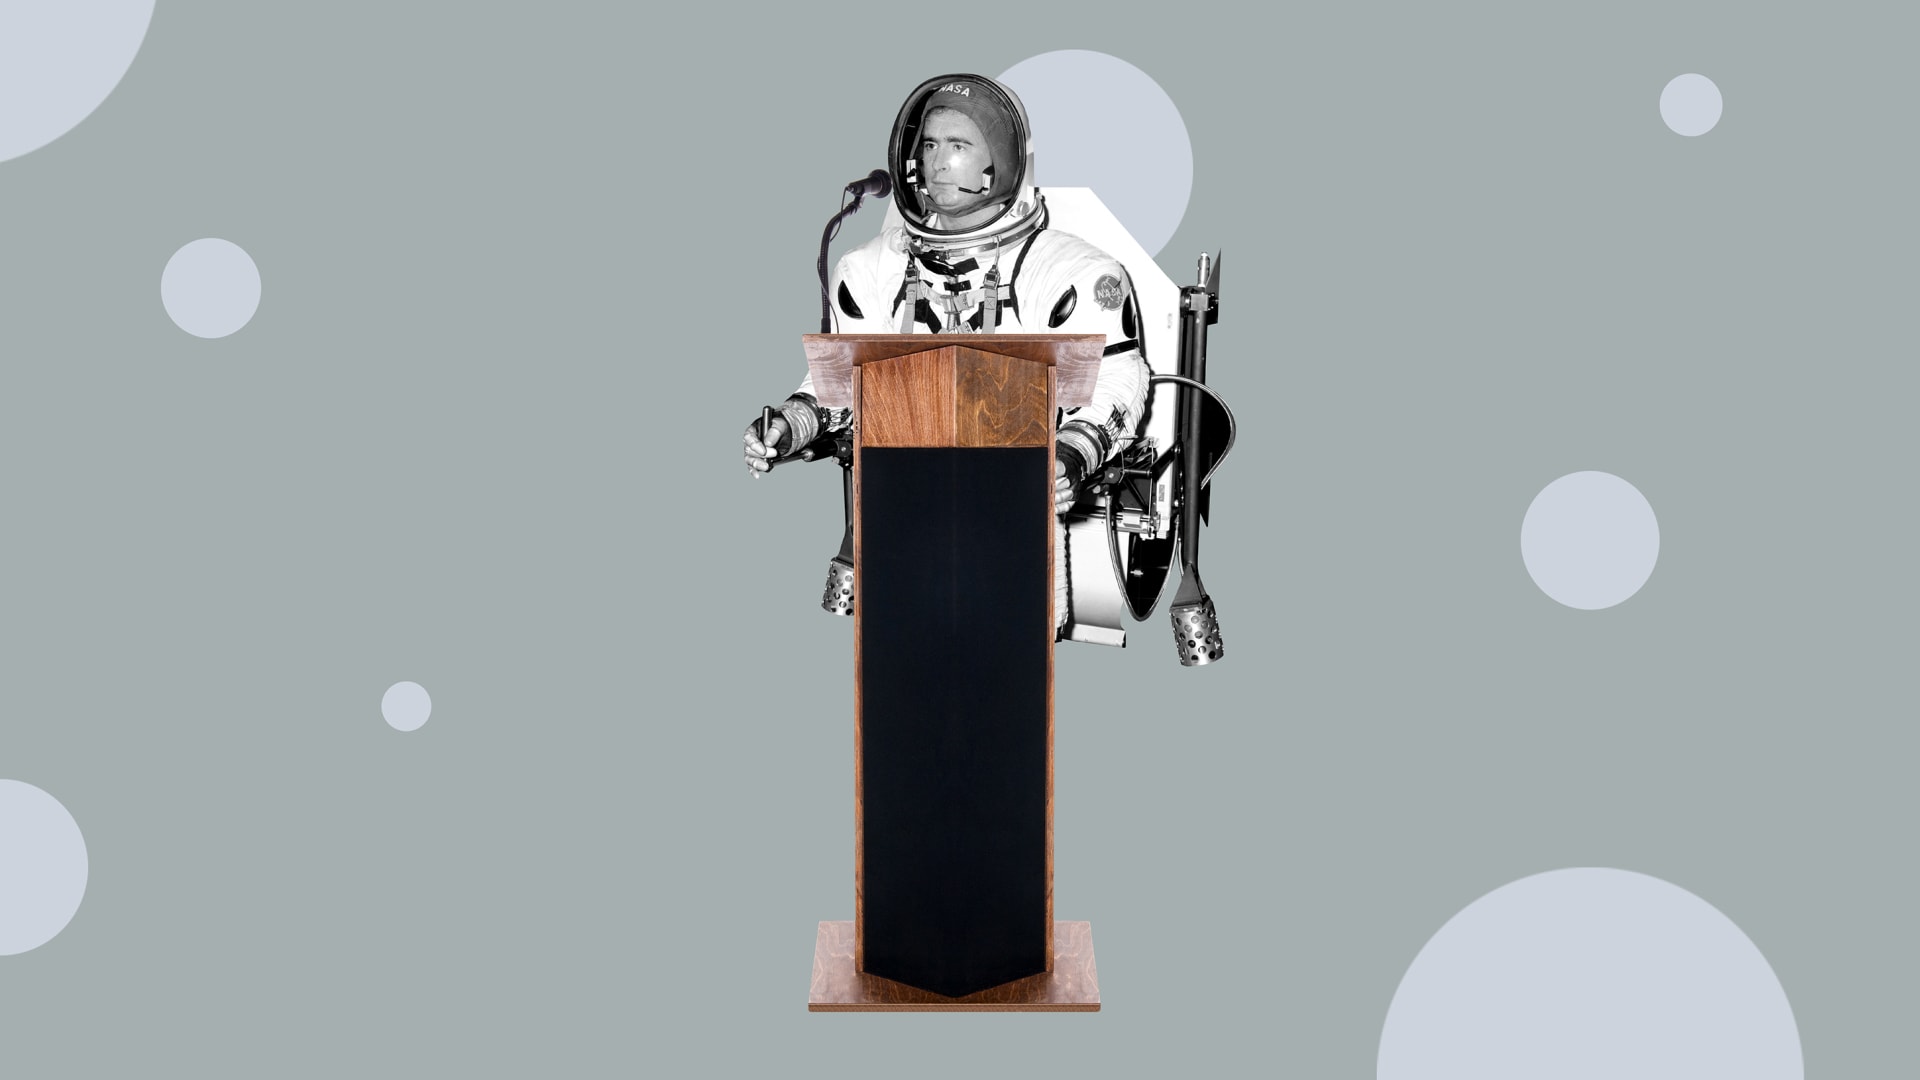 This Astronaut Training Strategy Can Help You Manage Your Fear of Public Speaking